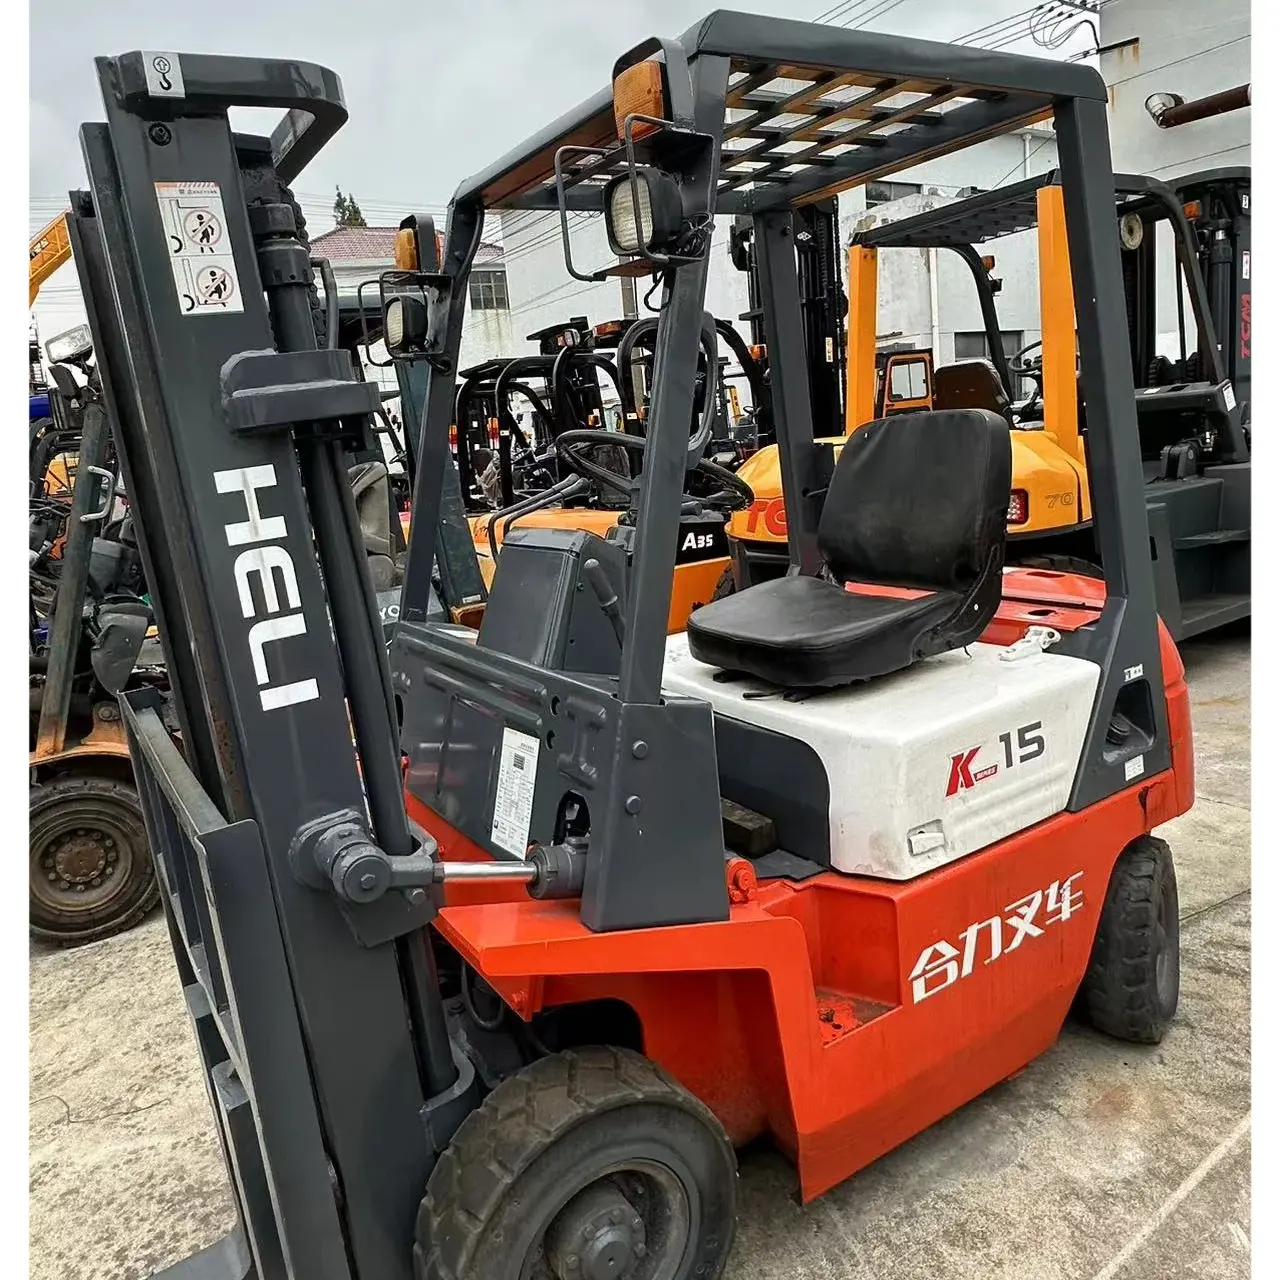 Used Heli FD15 1.5 ton diesel second hand heli forklift 1.5 tons used forklift on sale in Shanghai